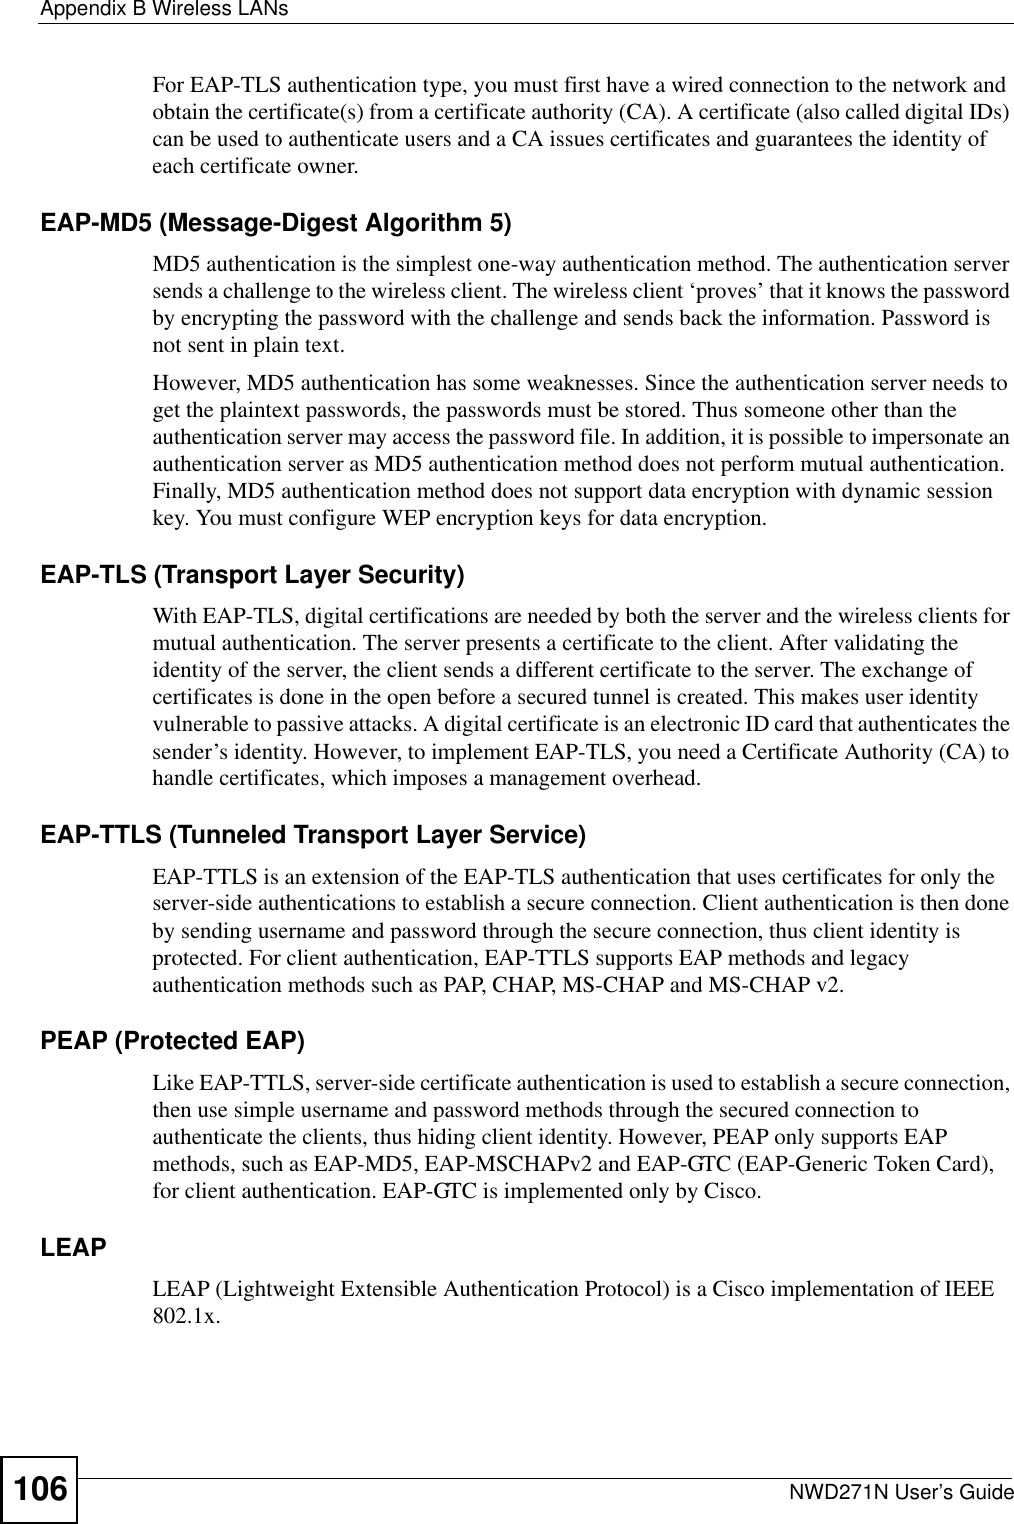 Appendix B Wireless LANsNWD271N User’s Guide106For EAP-TLS authentication type, you must first have a wired connection to the network and obtain the certificate(s) from a certificate authority (CA). A certificate (also called digital IDs) can be used to authenticate users and a CA issues certificates and guarantees the identity of each certificate owner.EAP-MD5 (Message-Digest Algorithm 5)MD5 authentication is the simplest one-way authentication method. The authentication server sends a challenge to the wireless client. The wireless client ‘proves’ that it knows the password by encrypting the password with the challenge and sends back the information. Password is not sent in plain text. However, MD5 authentication has some weaknesses. Since the authentication server needs to get the plaintext passwords, the passwords must be stored. Thus someone other than the authentication server may access the password file. In addition, it is possible to impersonate an authentication server as MD5 authentication method does not perform mutual authentication. Finally, MD5 authentication method does not support data encryption with dynamic session key. You must configure WEP encryption keys for data encryption. EAP-TLS (Transport Layer Security)With EAP-TLS, digital certifications are needed by both the server and the wireless clients for mutual authentication. The server presents a certificate to the client. After validating the identity of the server, the client sends a different certificate to the server. The exchange of certificates is done in the open before a secured tunnel is created. This makes user identity vulnerable to passive attacks. A digital certificate is an electronic ID card that authenticates the sender’s identity. However, to implement EAP-TLS, you need a Certificate Authority (CA) to handle certificates, which imposes a management overhead. EAP-TTLS (Tunneled Transport Layer Service) EAP-TTLS is an extension of the EAP-TLS authentication that uses certificates for only the server-side authentications to establish a secure connection. Client authentication is then done by sending username and password through the secure connection, thus client identity is protected. For client authentication, EAP-TTLS supports EAP methods and legacy authentication methods such as PAP, CHAP, MS-CHAP and MS-CHAP v2. PEAP (Protected EAP)   Like EAP-TTLS, server-side certificate authentication is used to establish a secure connection, then use simple username and password methods through the secured connection to authenticate the clients, thus hiding client identity. However, PEAP only supports EAP methods, such as EAP-MD5, EAP-MSCHAPv2 and EAP-GTC (EAP-Generic Token Card), for client authentication. EAP-GTC is implemented only by Cisco.LEAPLEAP (Lightweight Extensible Authentication Protocol) is a Cisco implementation of IEEE 802.1x. 